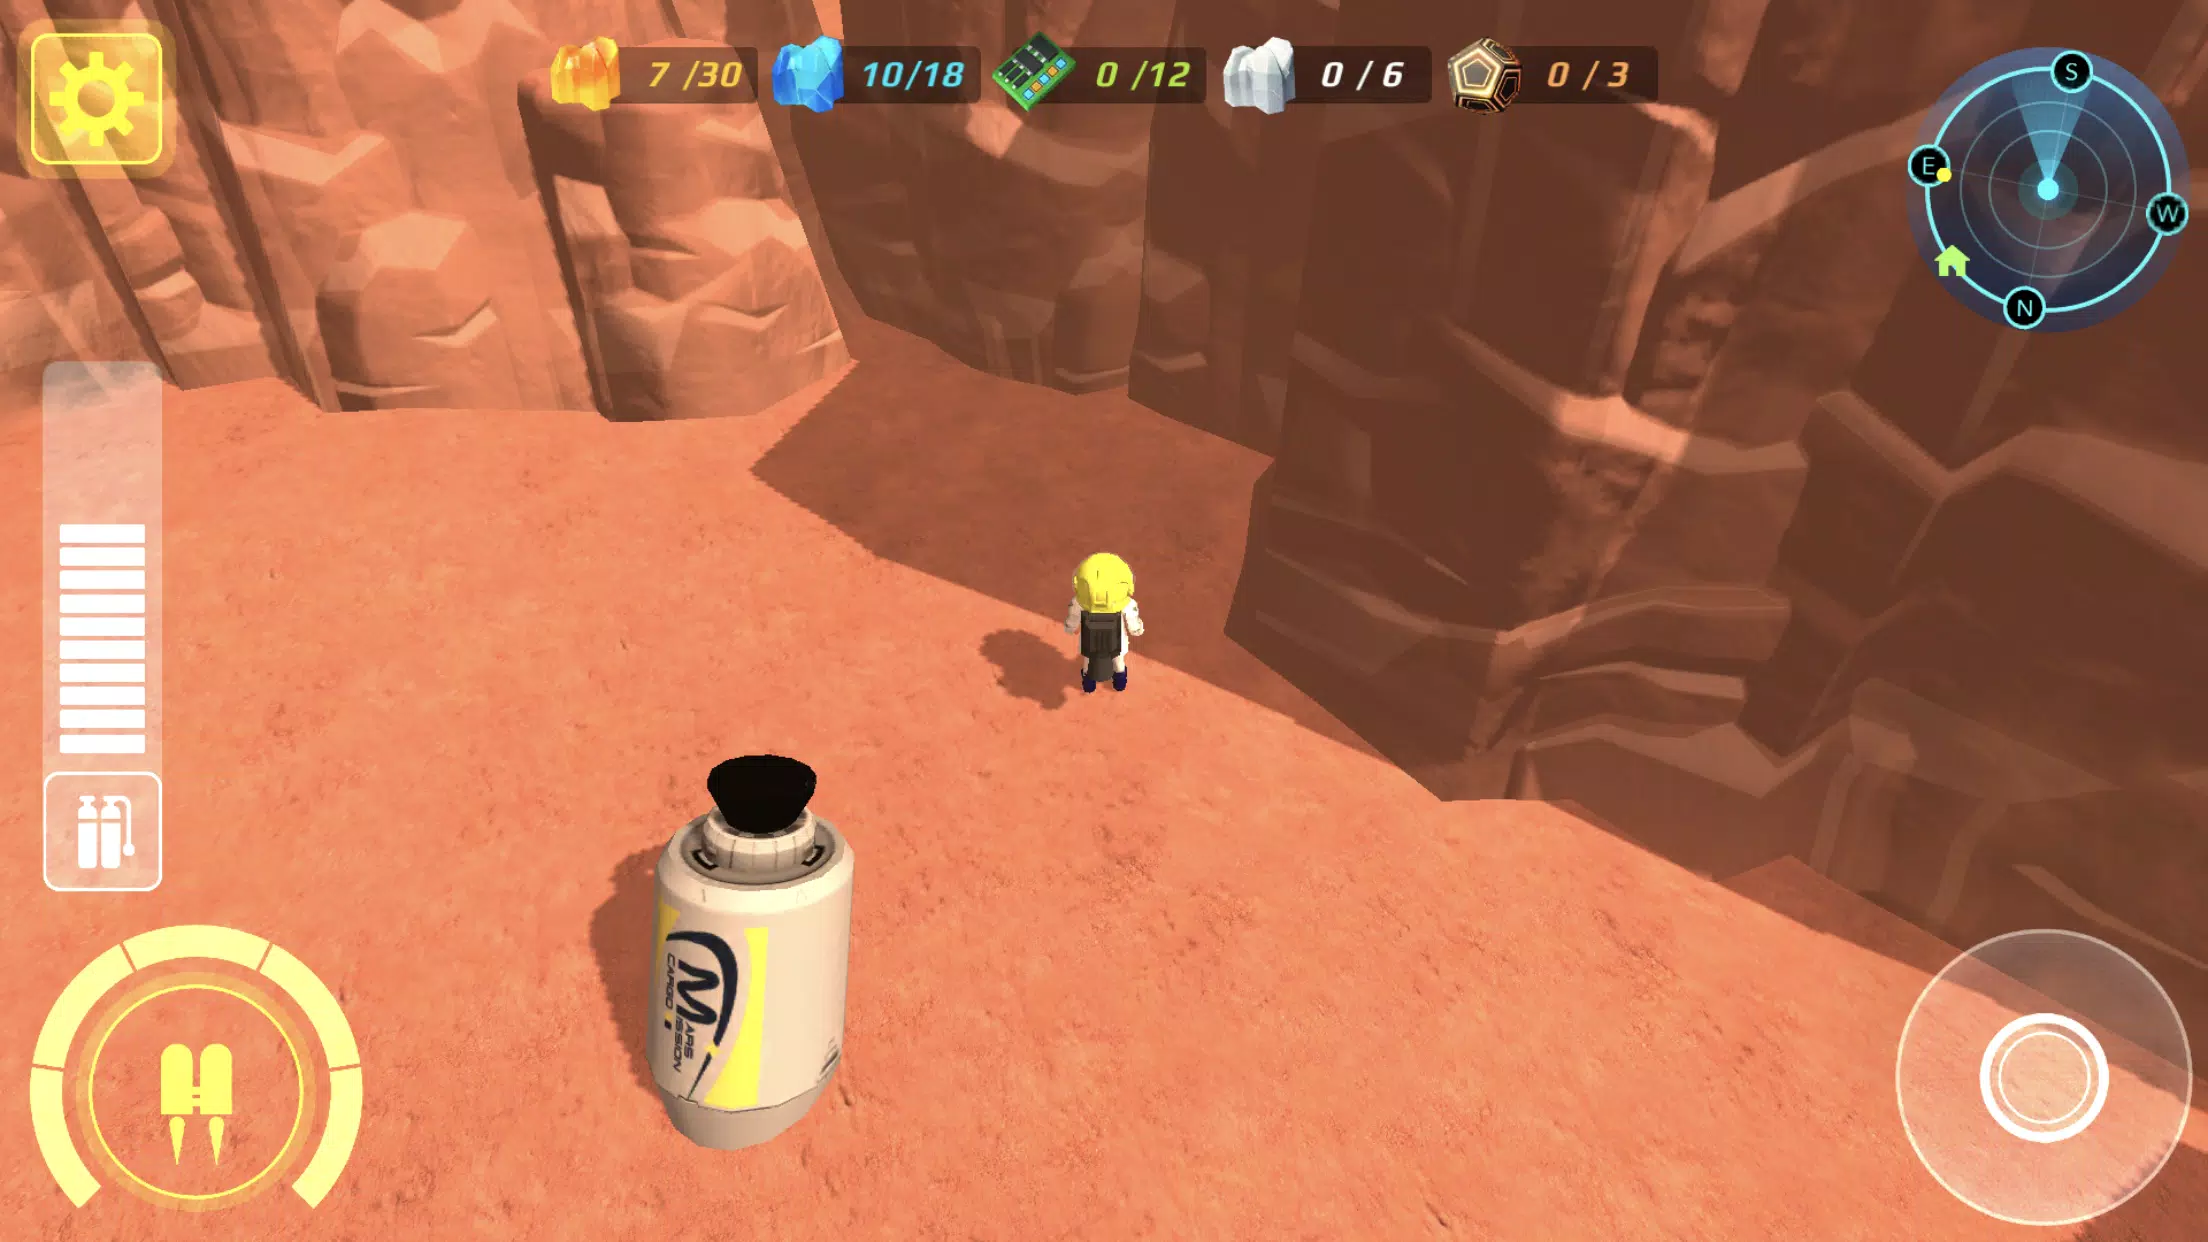 PLAYMOBIL Mars Mission for Android - APK Download